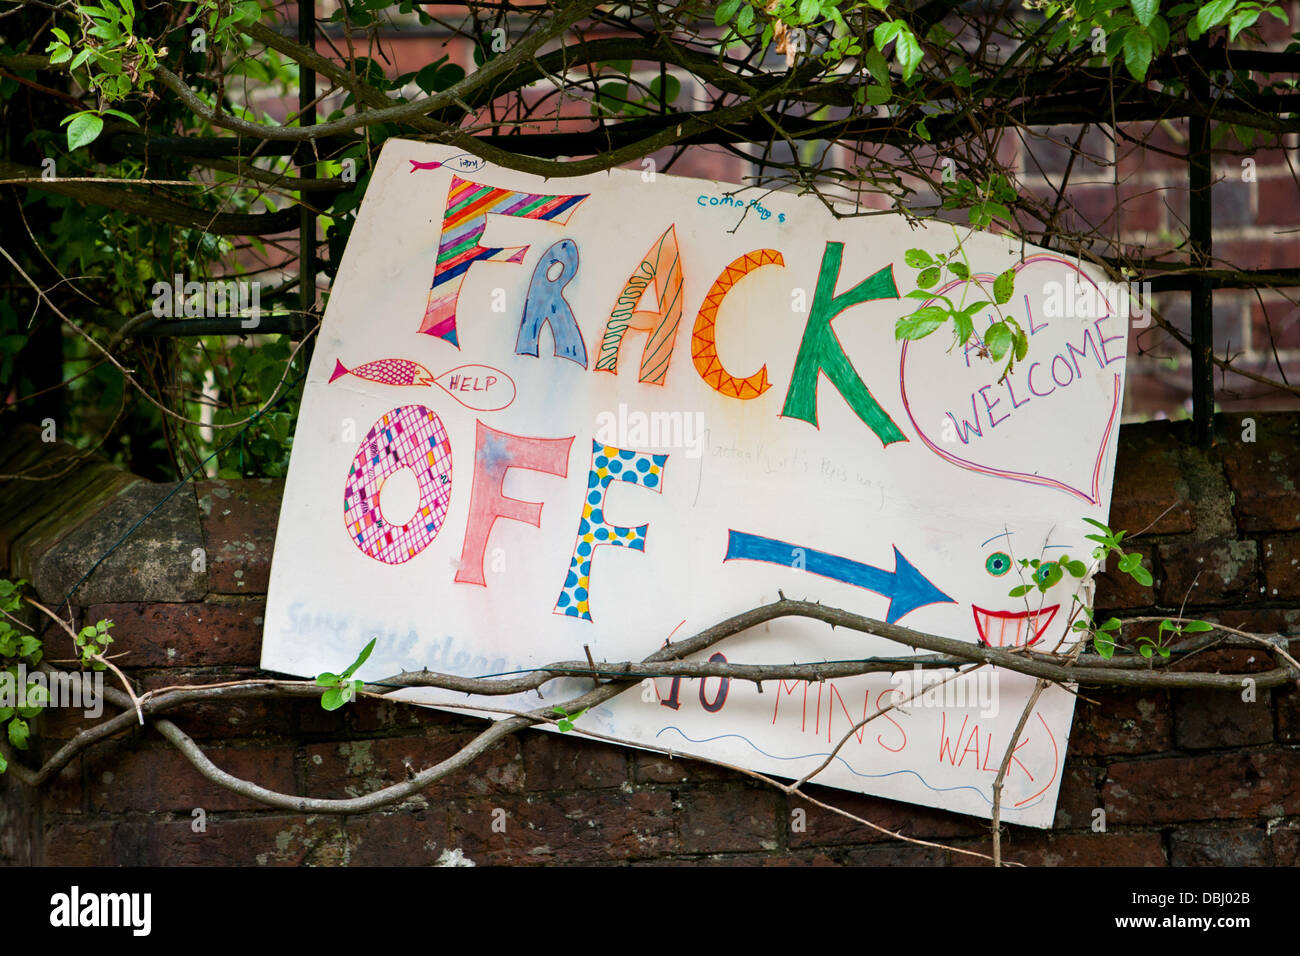 Balcombe, West Sussex, UK. 31st July, 2013. Frack off sign outside Balcombe station with arrow pointing to protest against Cuadrilla drilling & fracking. Balcombe, West Sussex, UK. Credit:  martyn wheatley/Alamy Live News Stock Photo